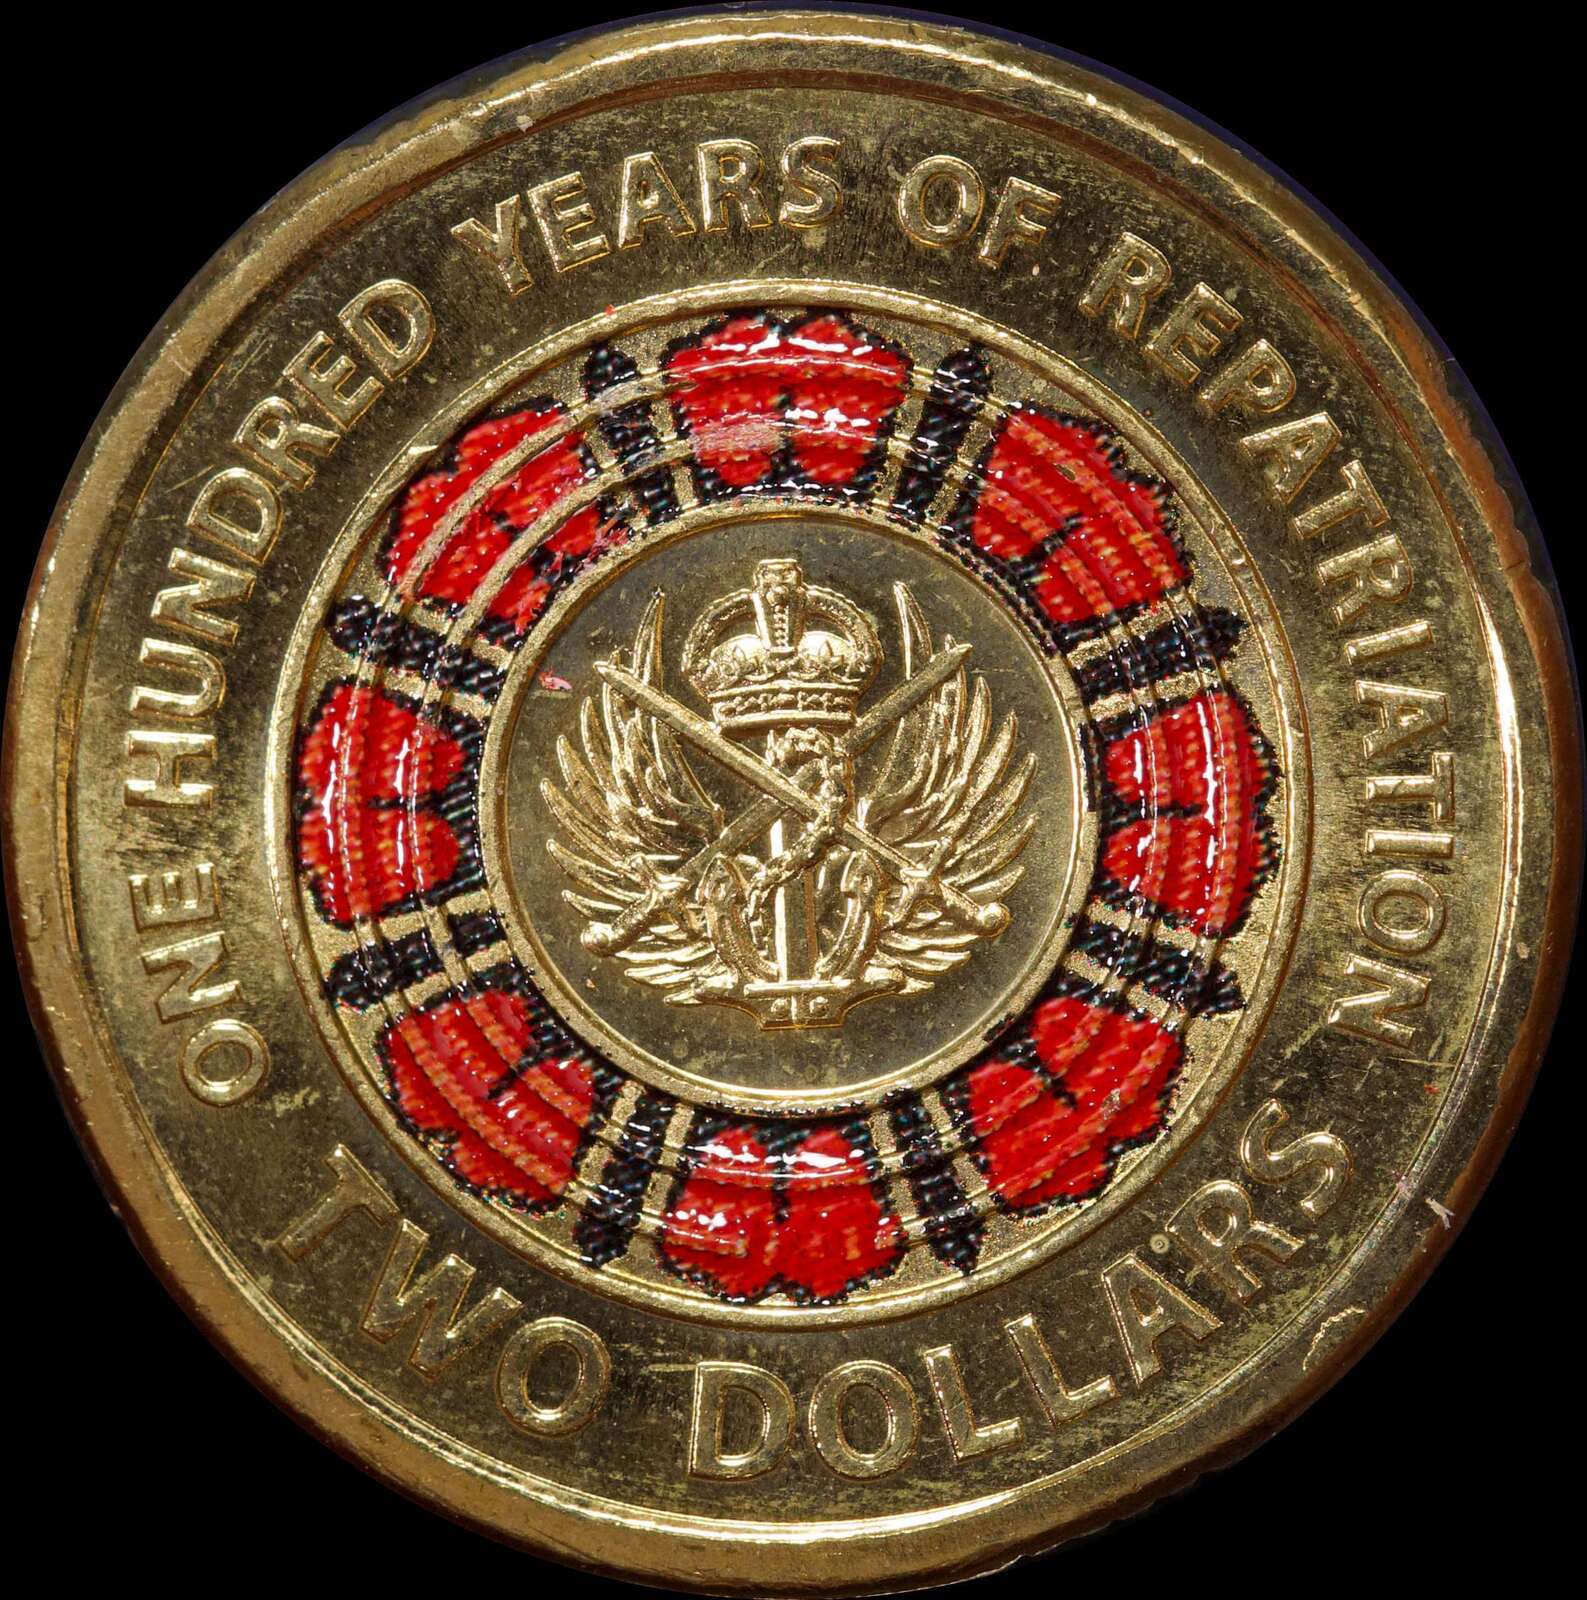 2019 Coloured 2 Dollar Repatriation Centenary Uncirculated product image